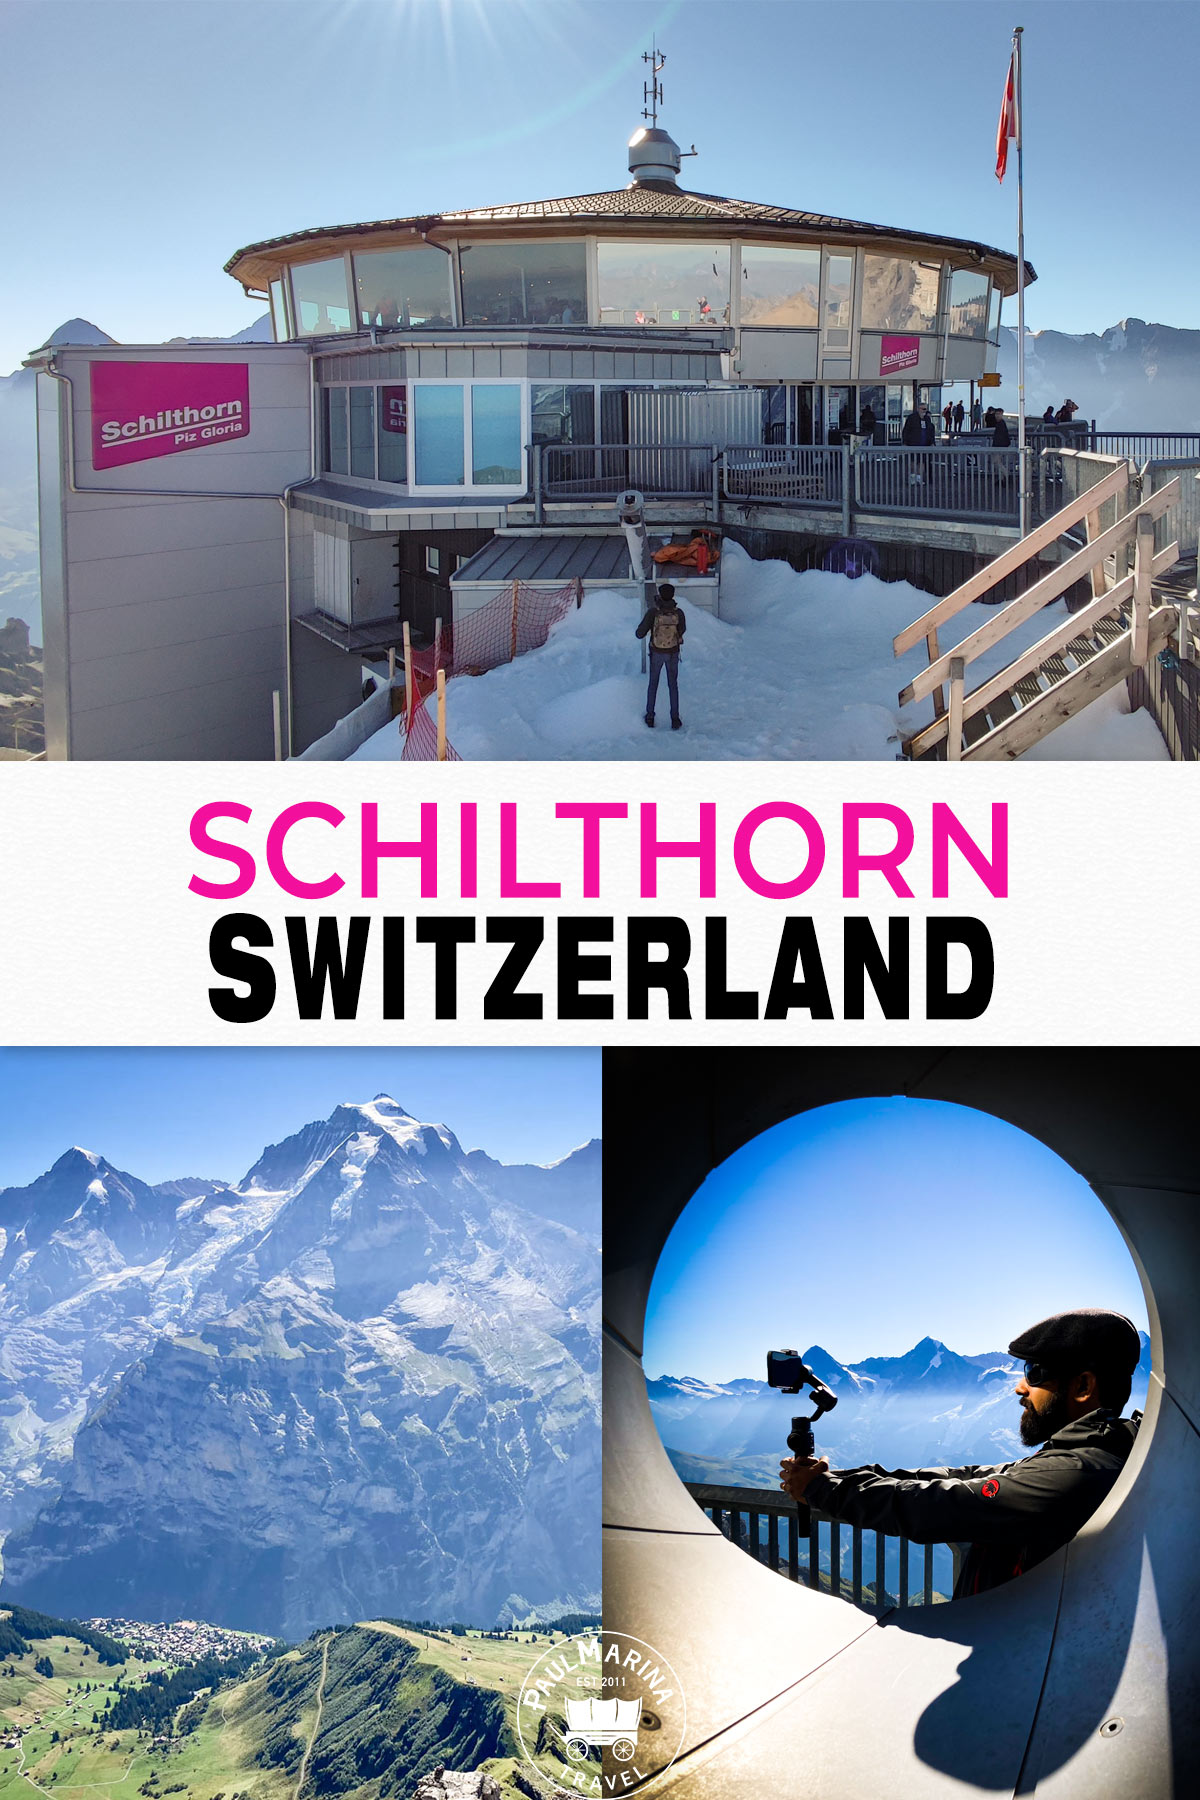 Guide to the Schilthorn Switzerland pin picture